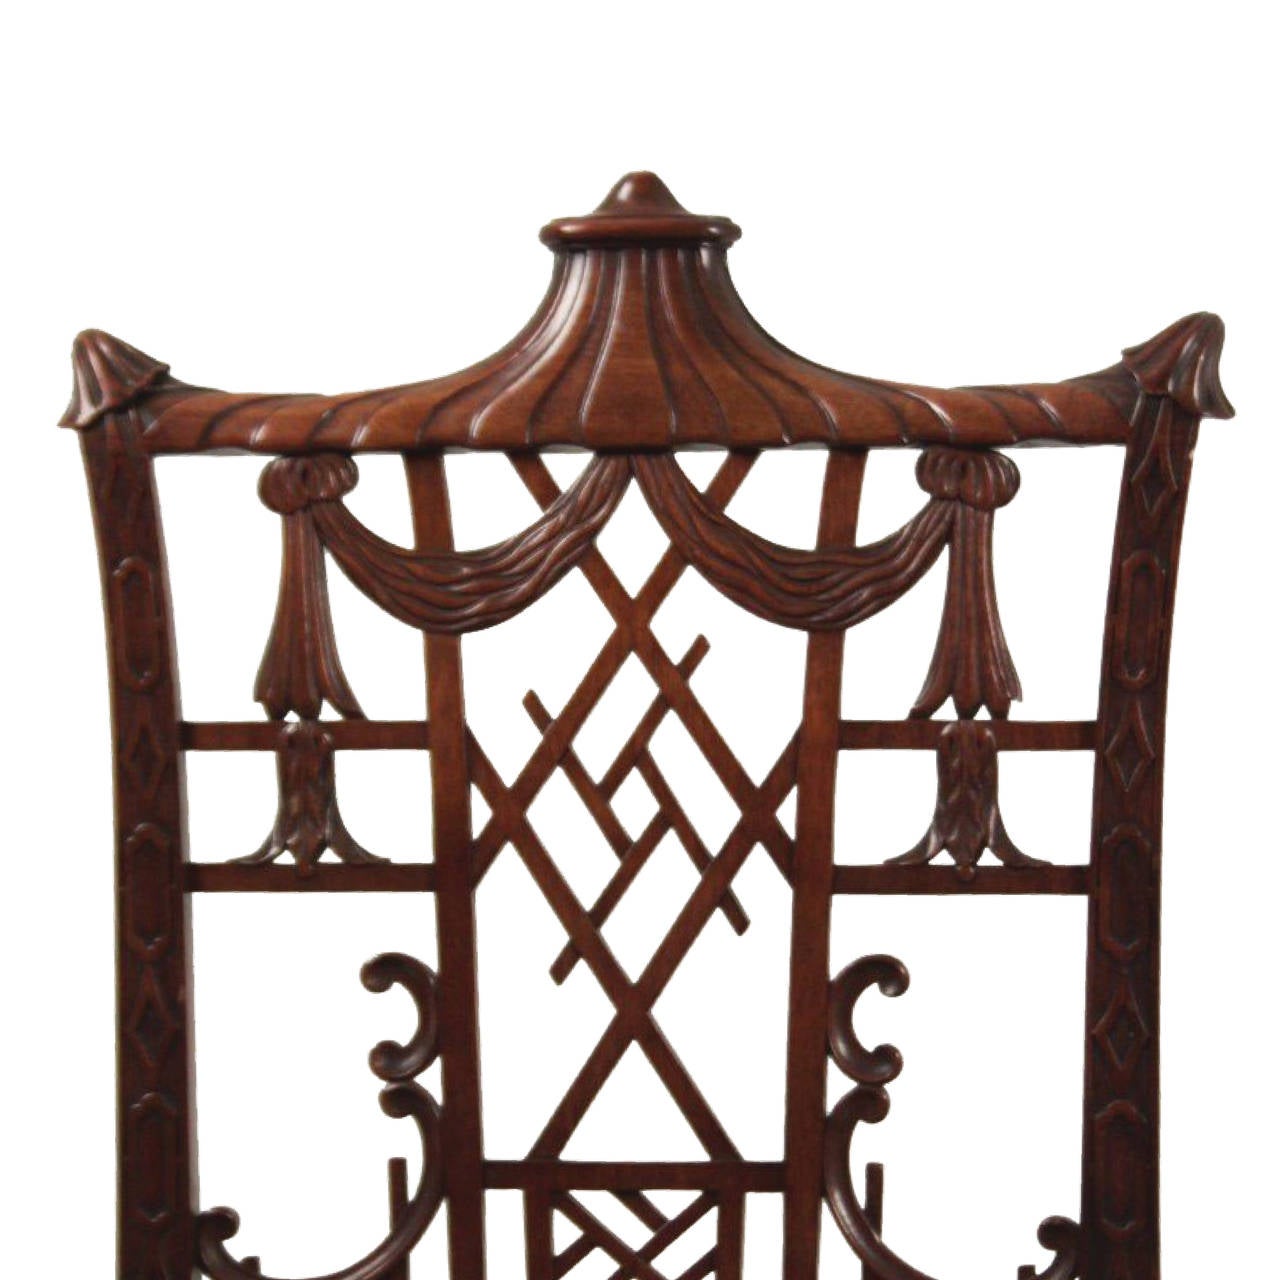 Two Chinese Chippendale chairs in mahogany with a carved backrest and pierced under-stretchers.